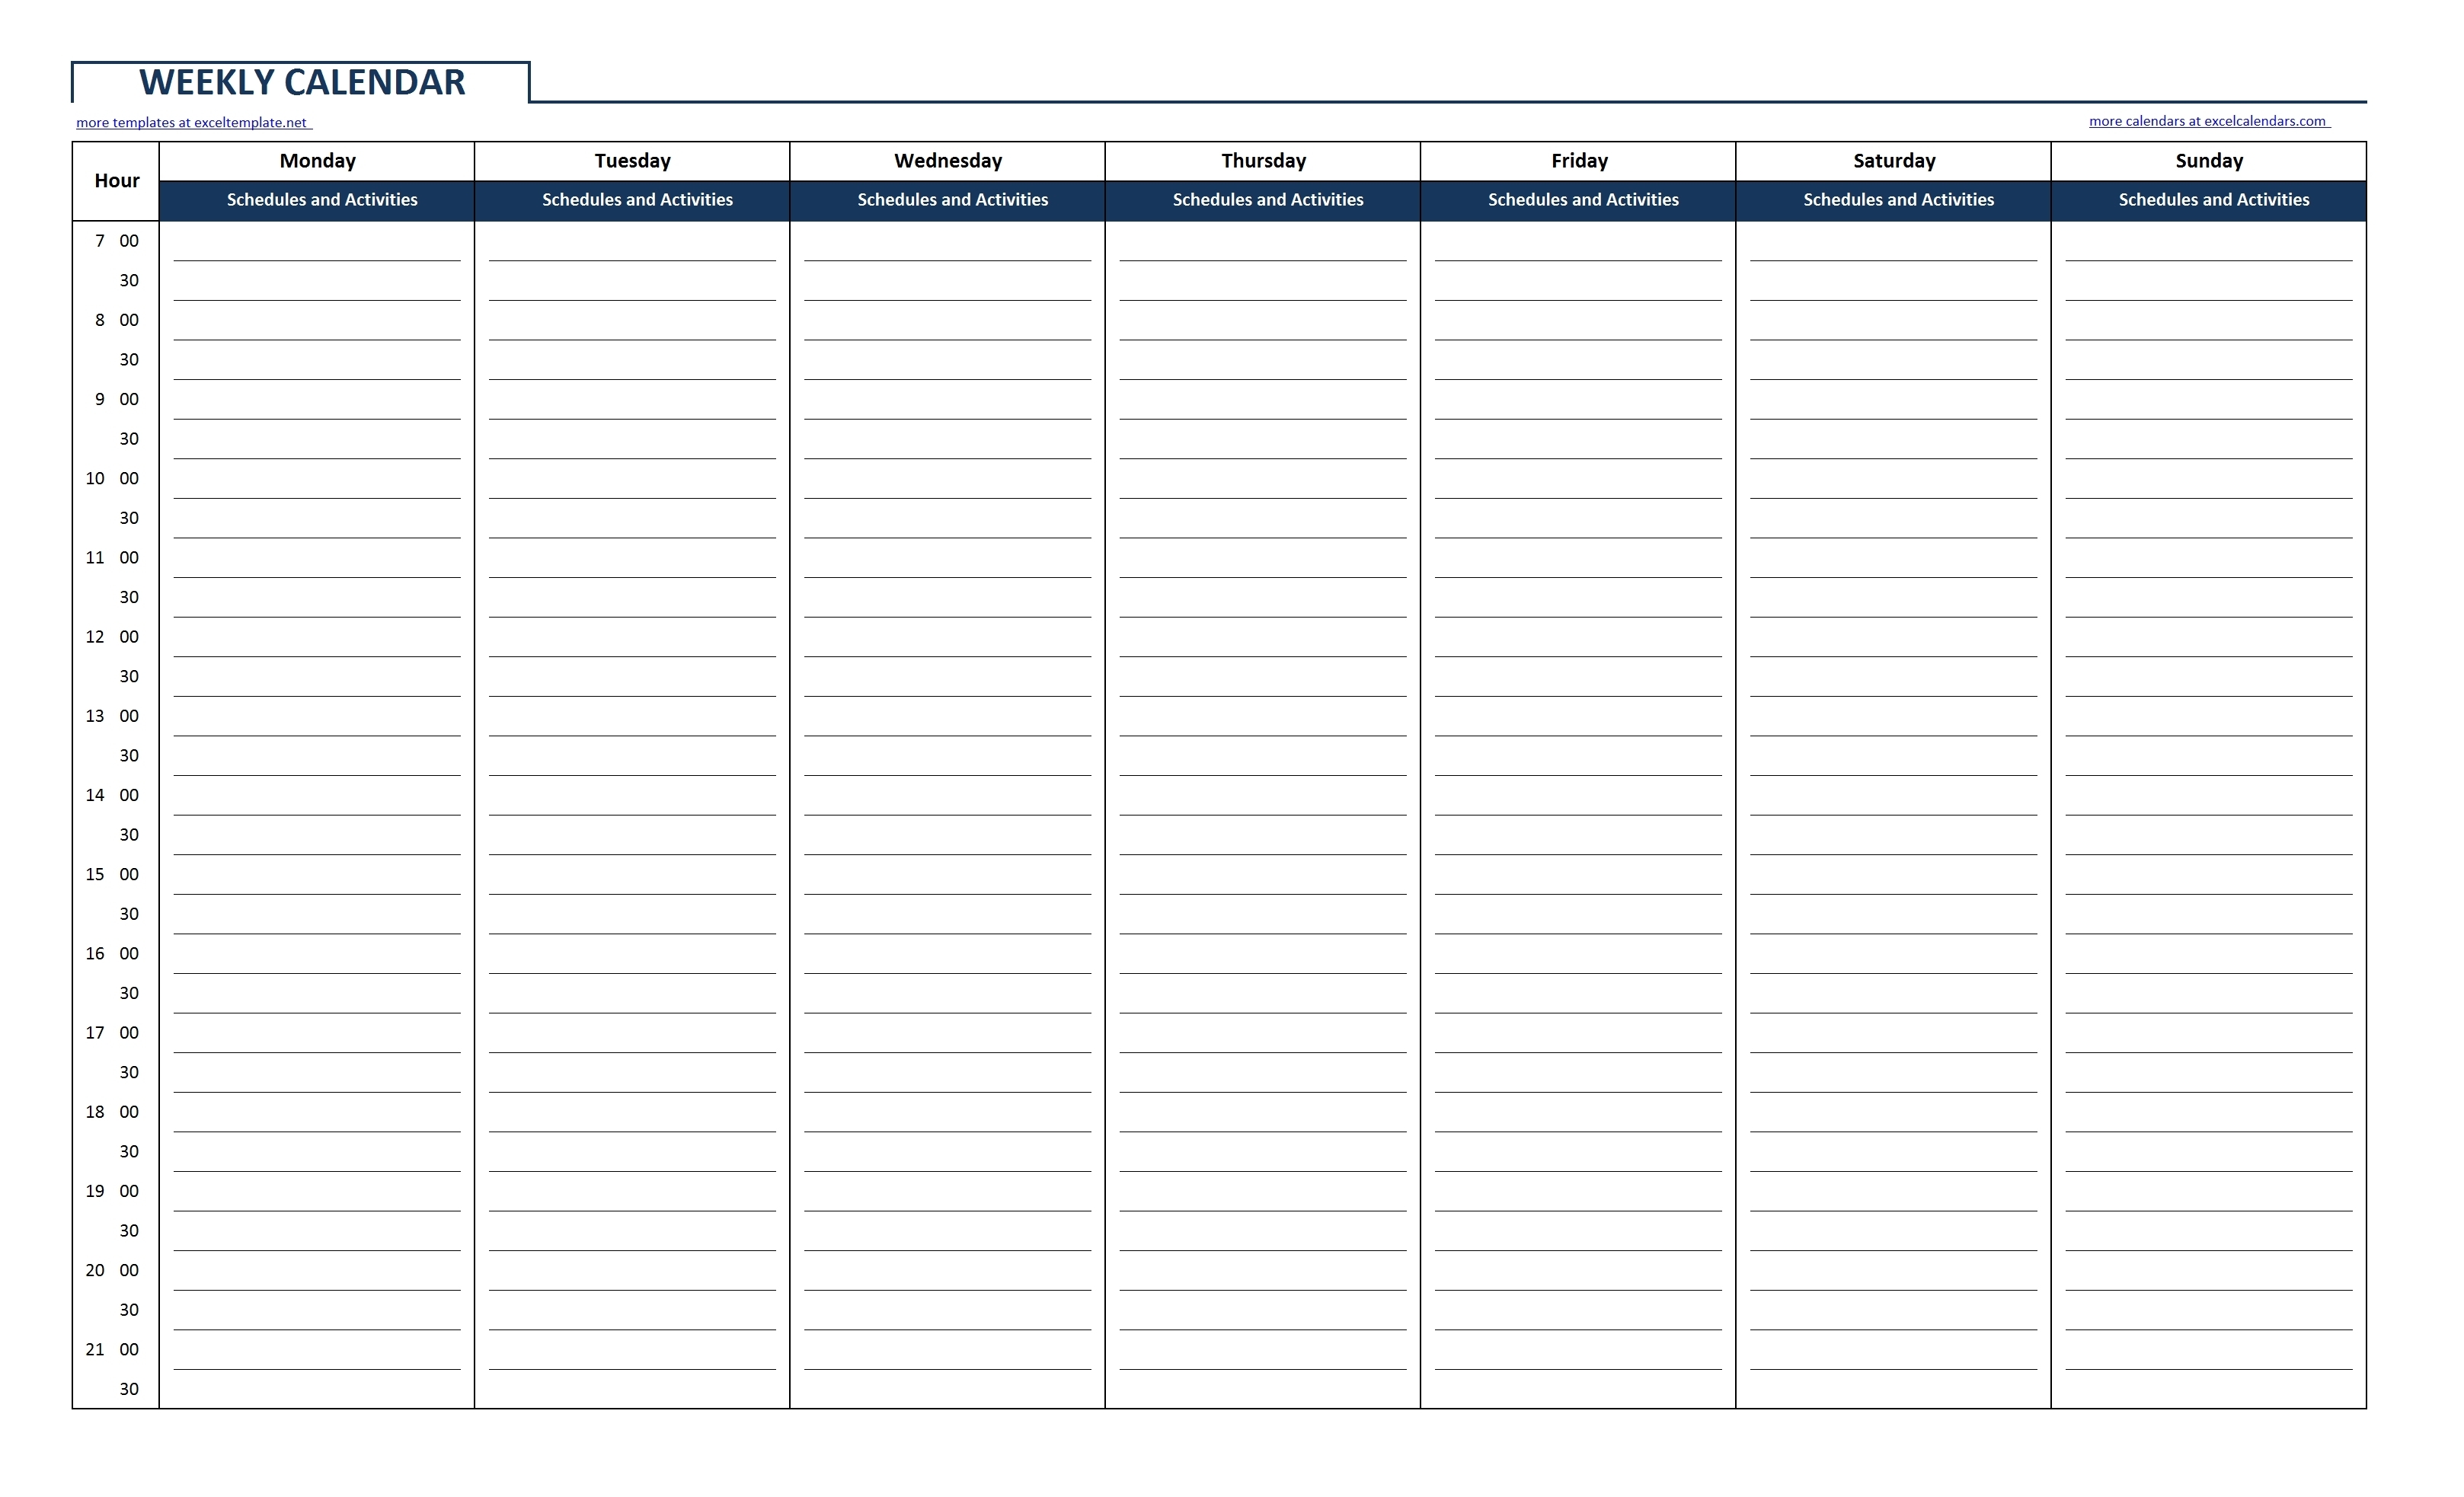 Blank Weekly Chedule With Times Download Them Or Print Calendar intended for Print A Blank Outlook Calendar With Times